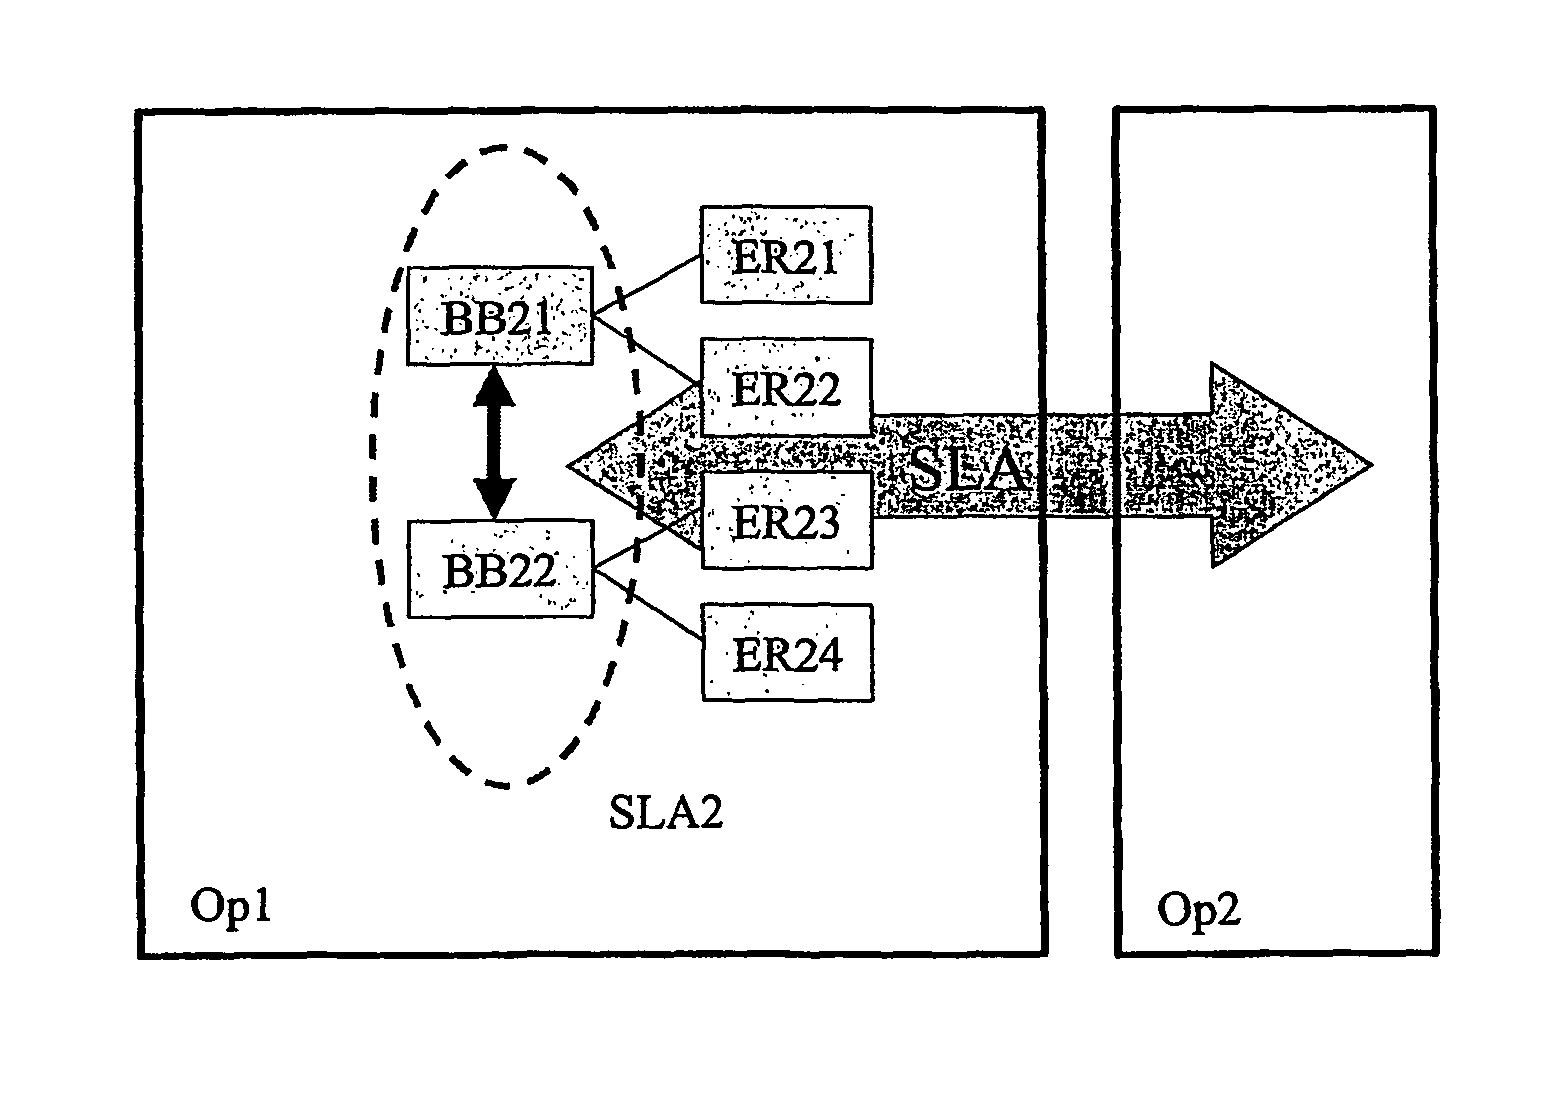 Method for the distribution of a network traffic according to SLA and QoS parameters